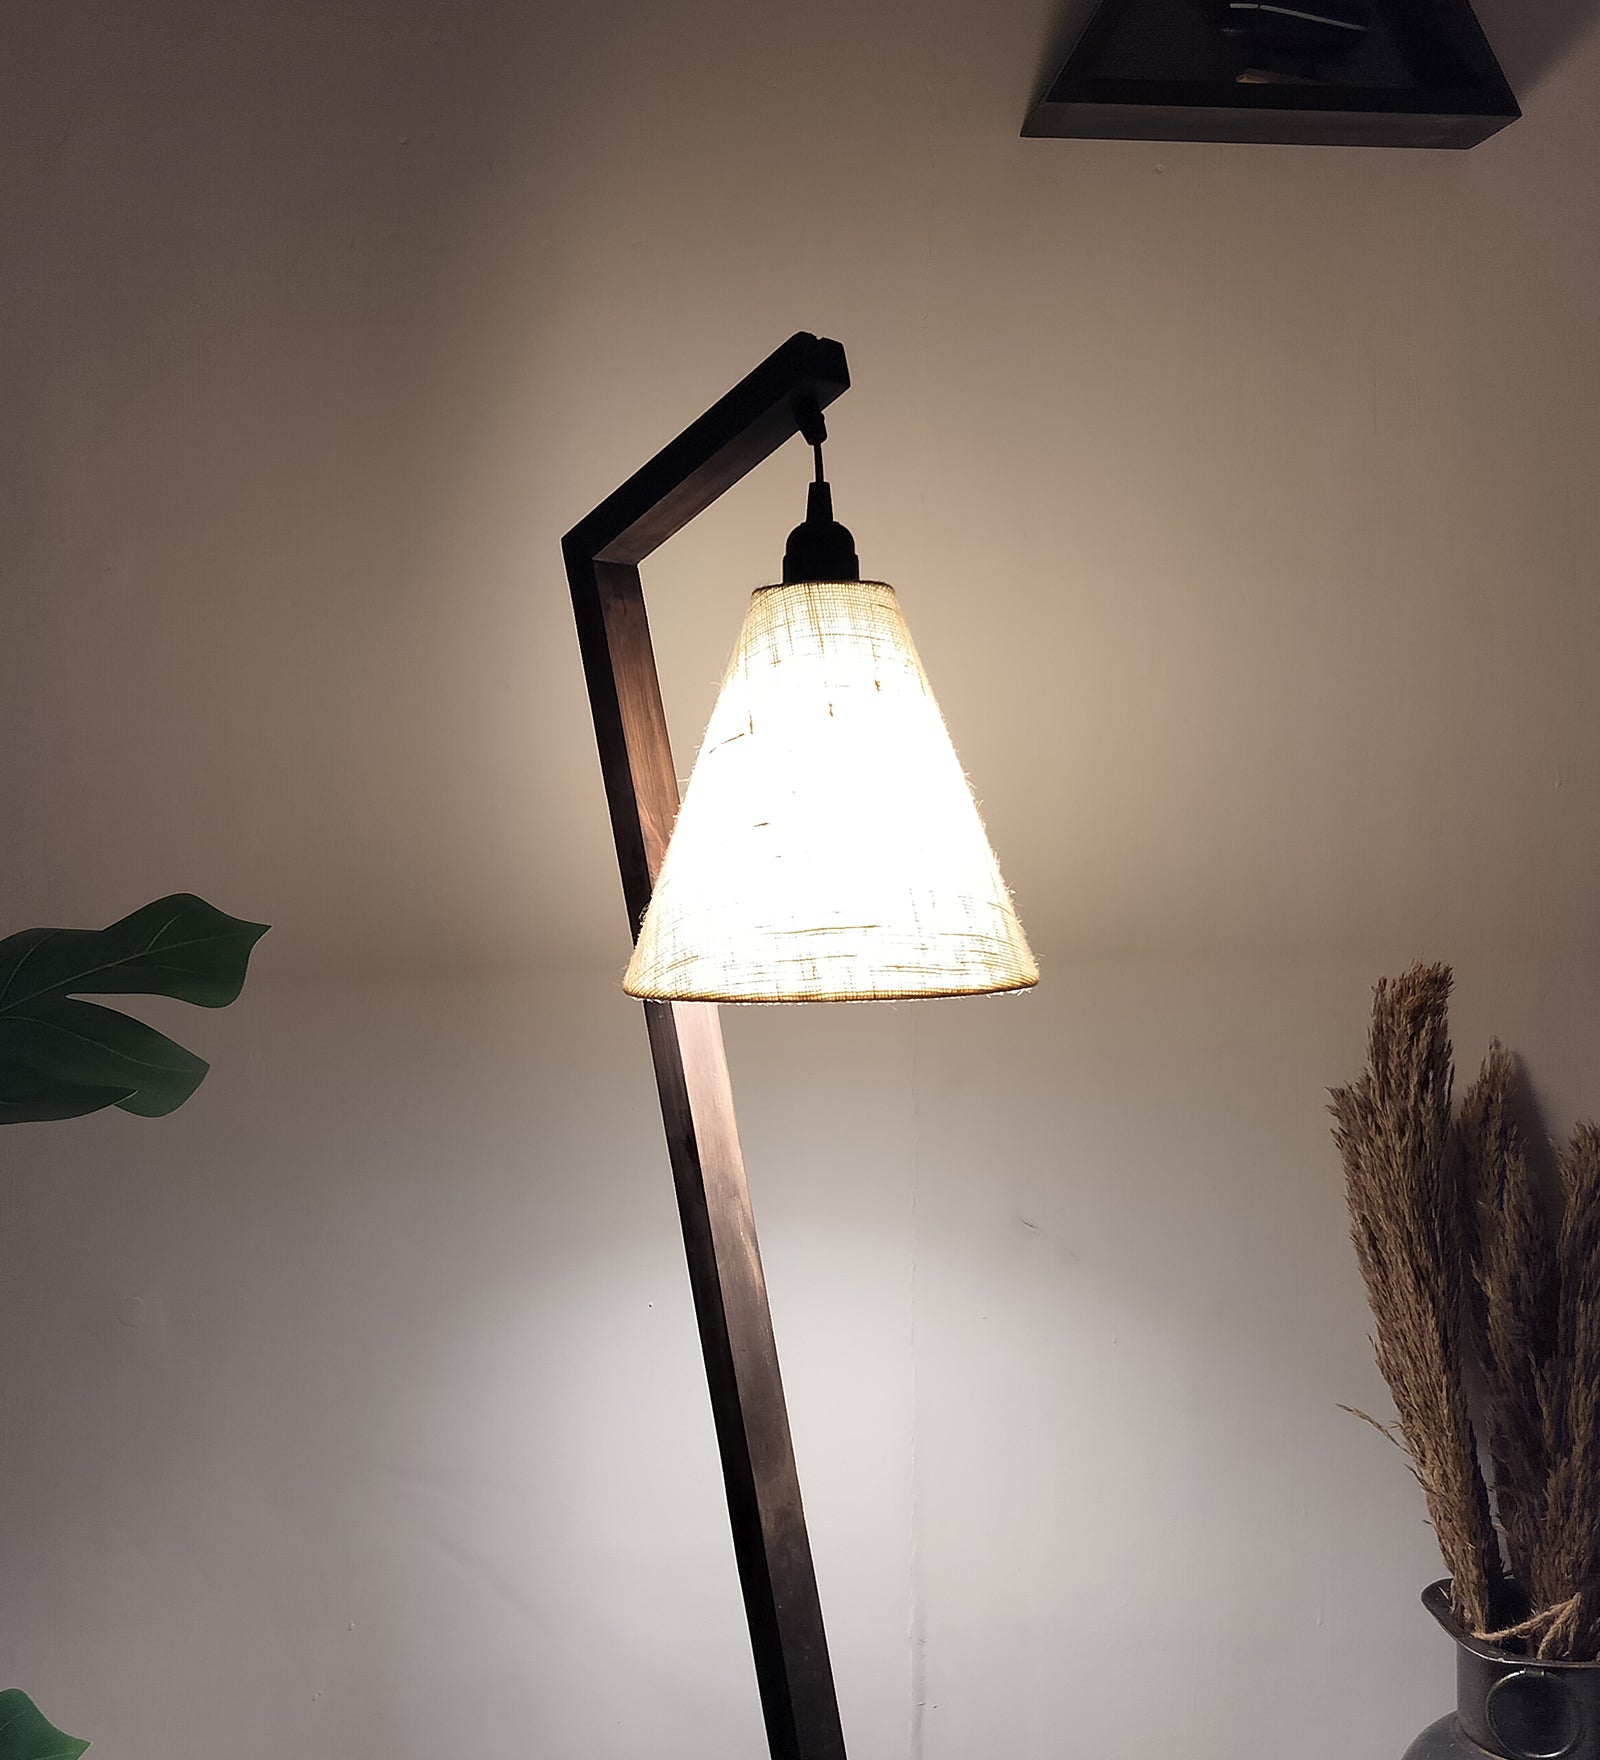 Hinge Wooden Floor Lamp with Brown Base and Beige Fabric Lampshade (BULB NOT INCLUDED)